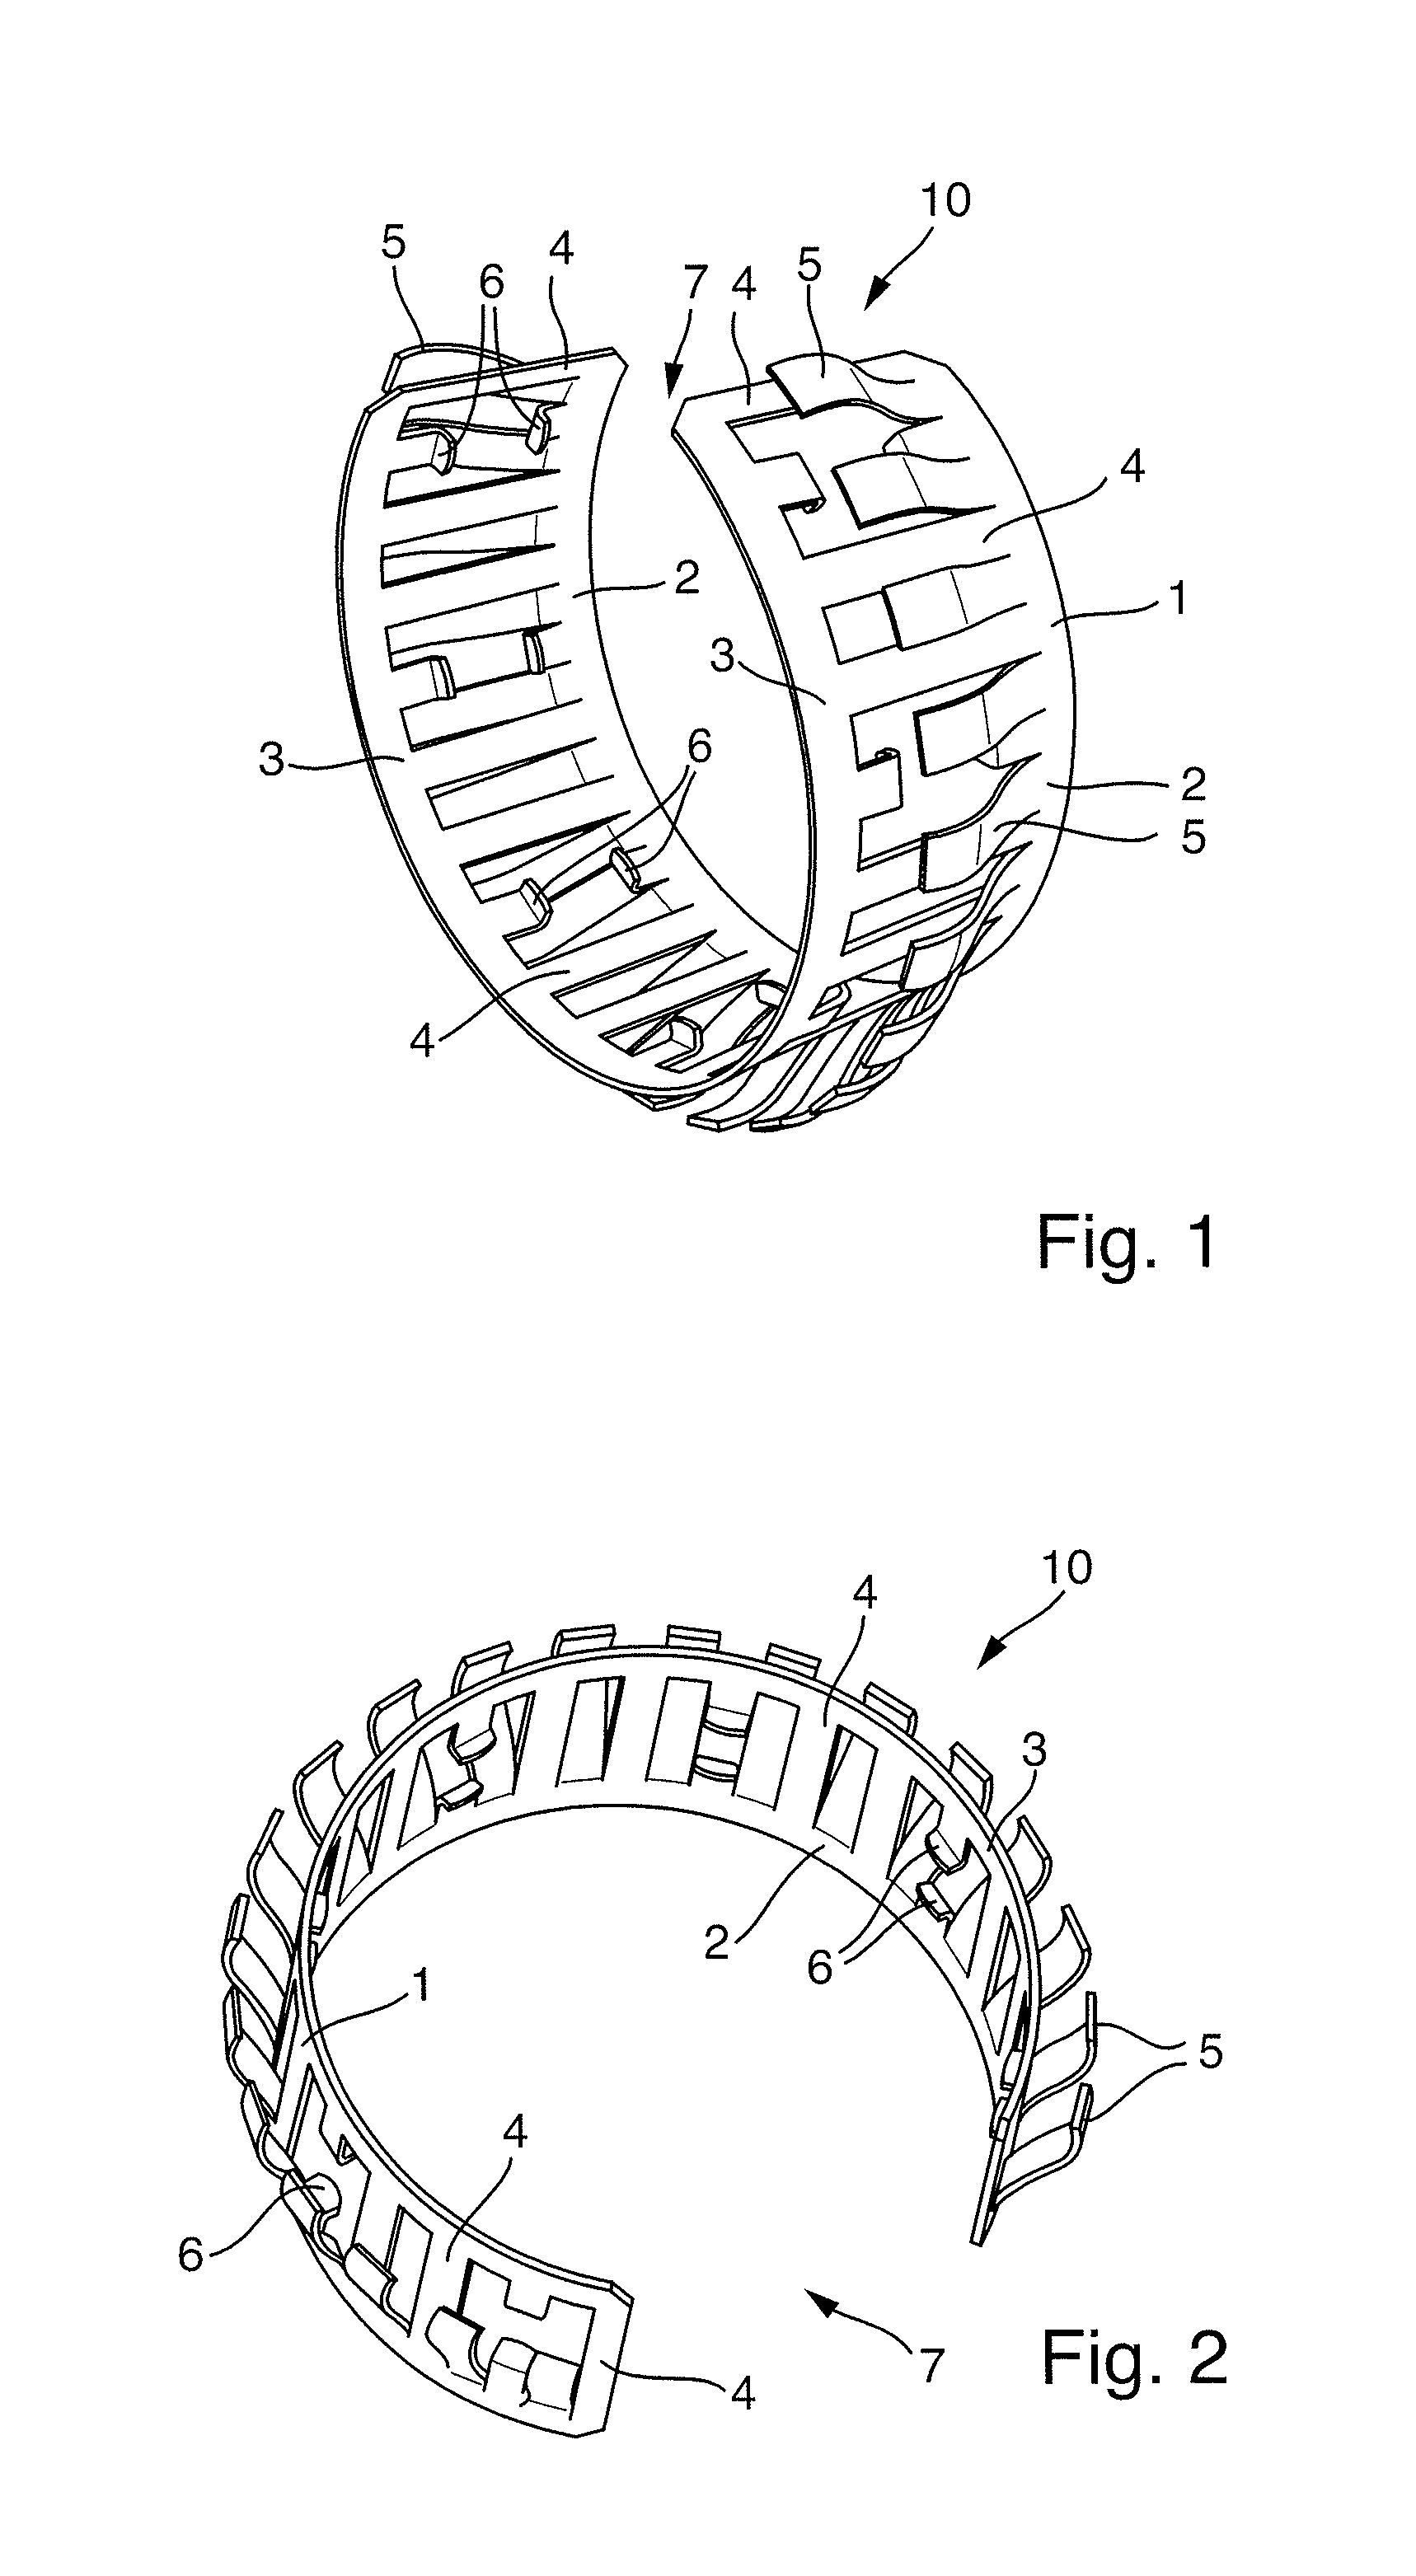 Spring clip for shielding of electrical connectors